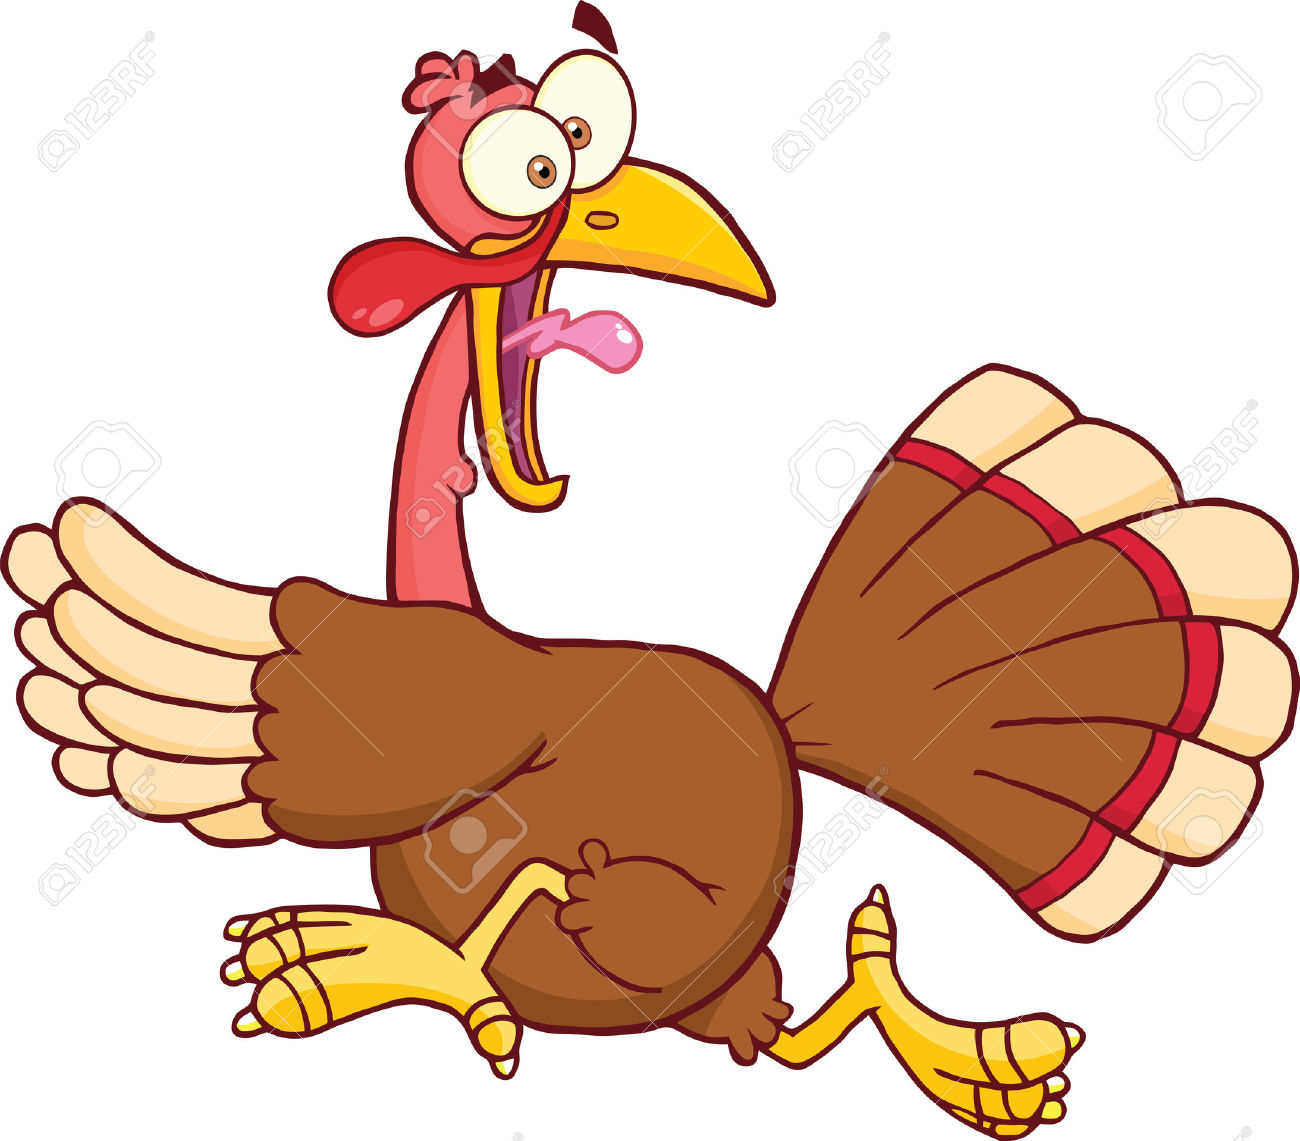 Clipart turkey flying. Animated pictures free download